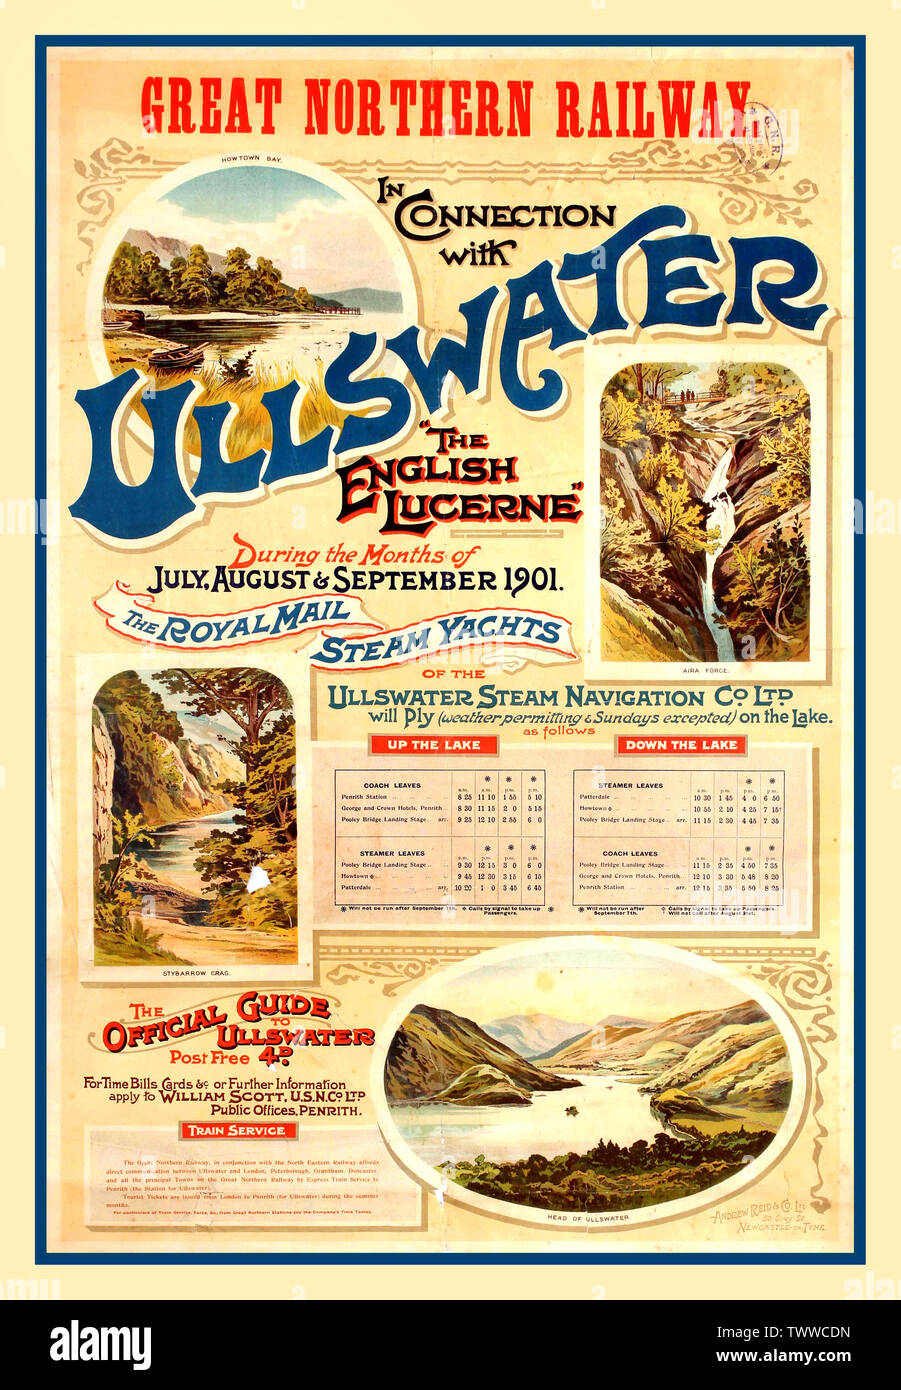 Original 1900’s vintage English British travel poster promoting holidays in Ullswater. Great Northern Railway . “Ullswater The English Lucerne” How Town Bay.. Aira Force and Stybarrow Crag Illustrated. Stock Photo